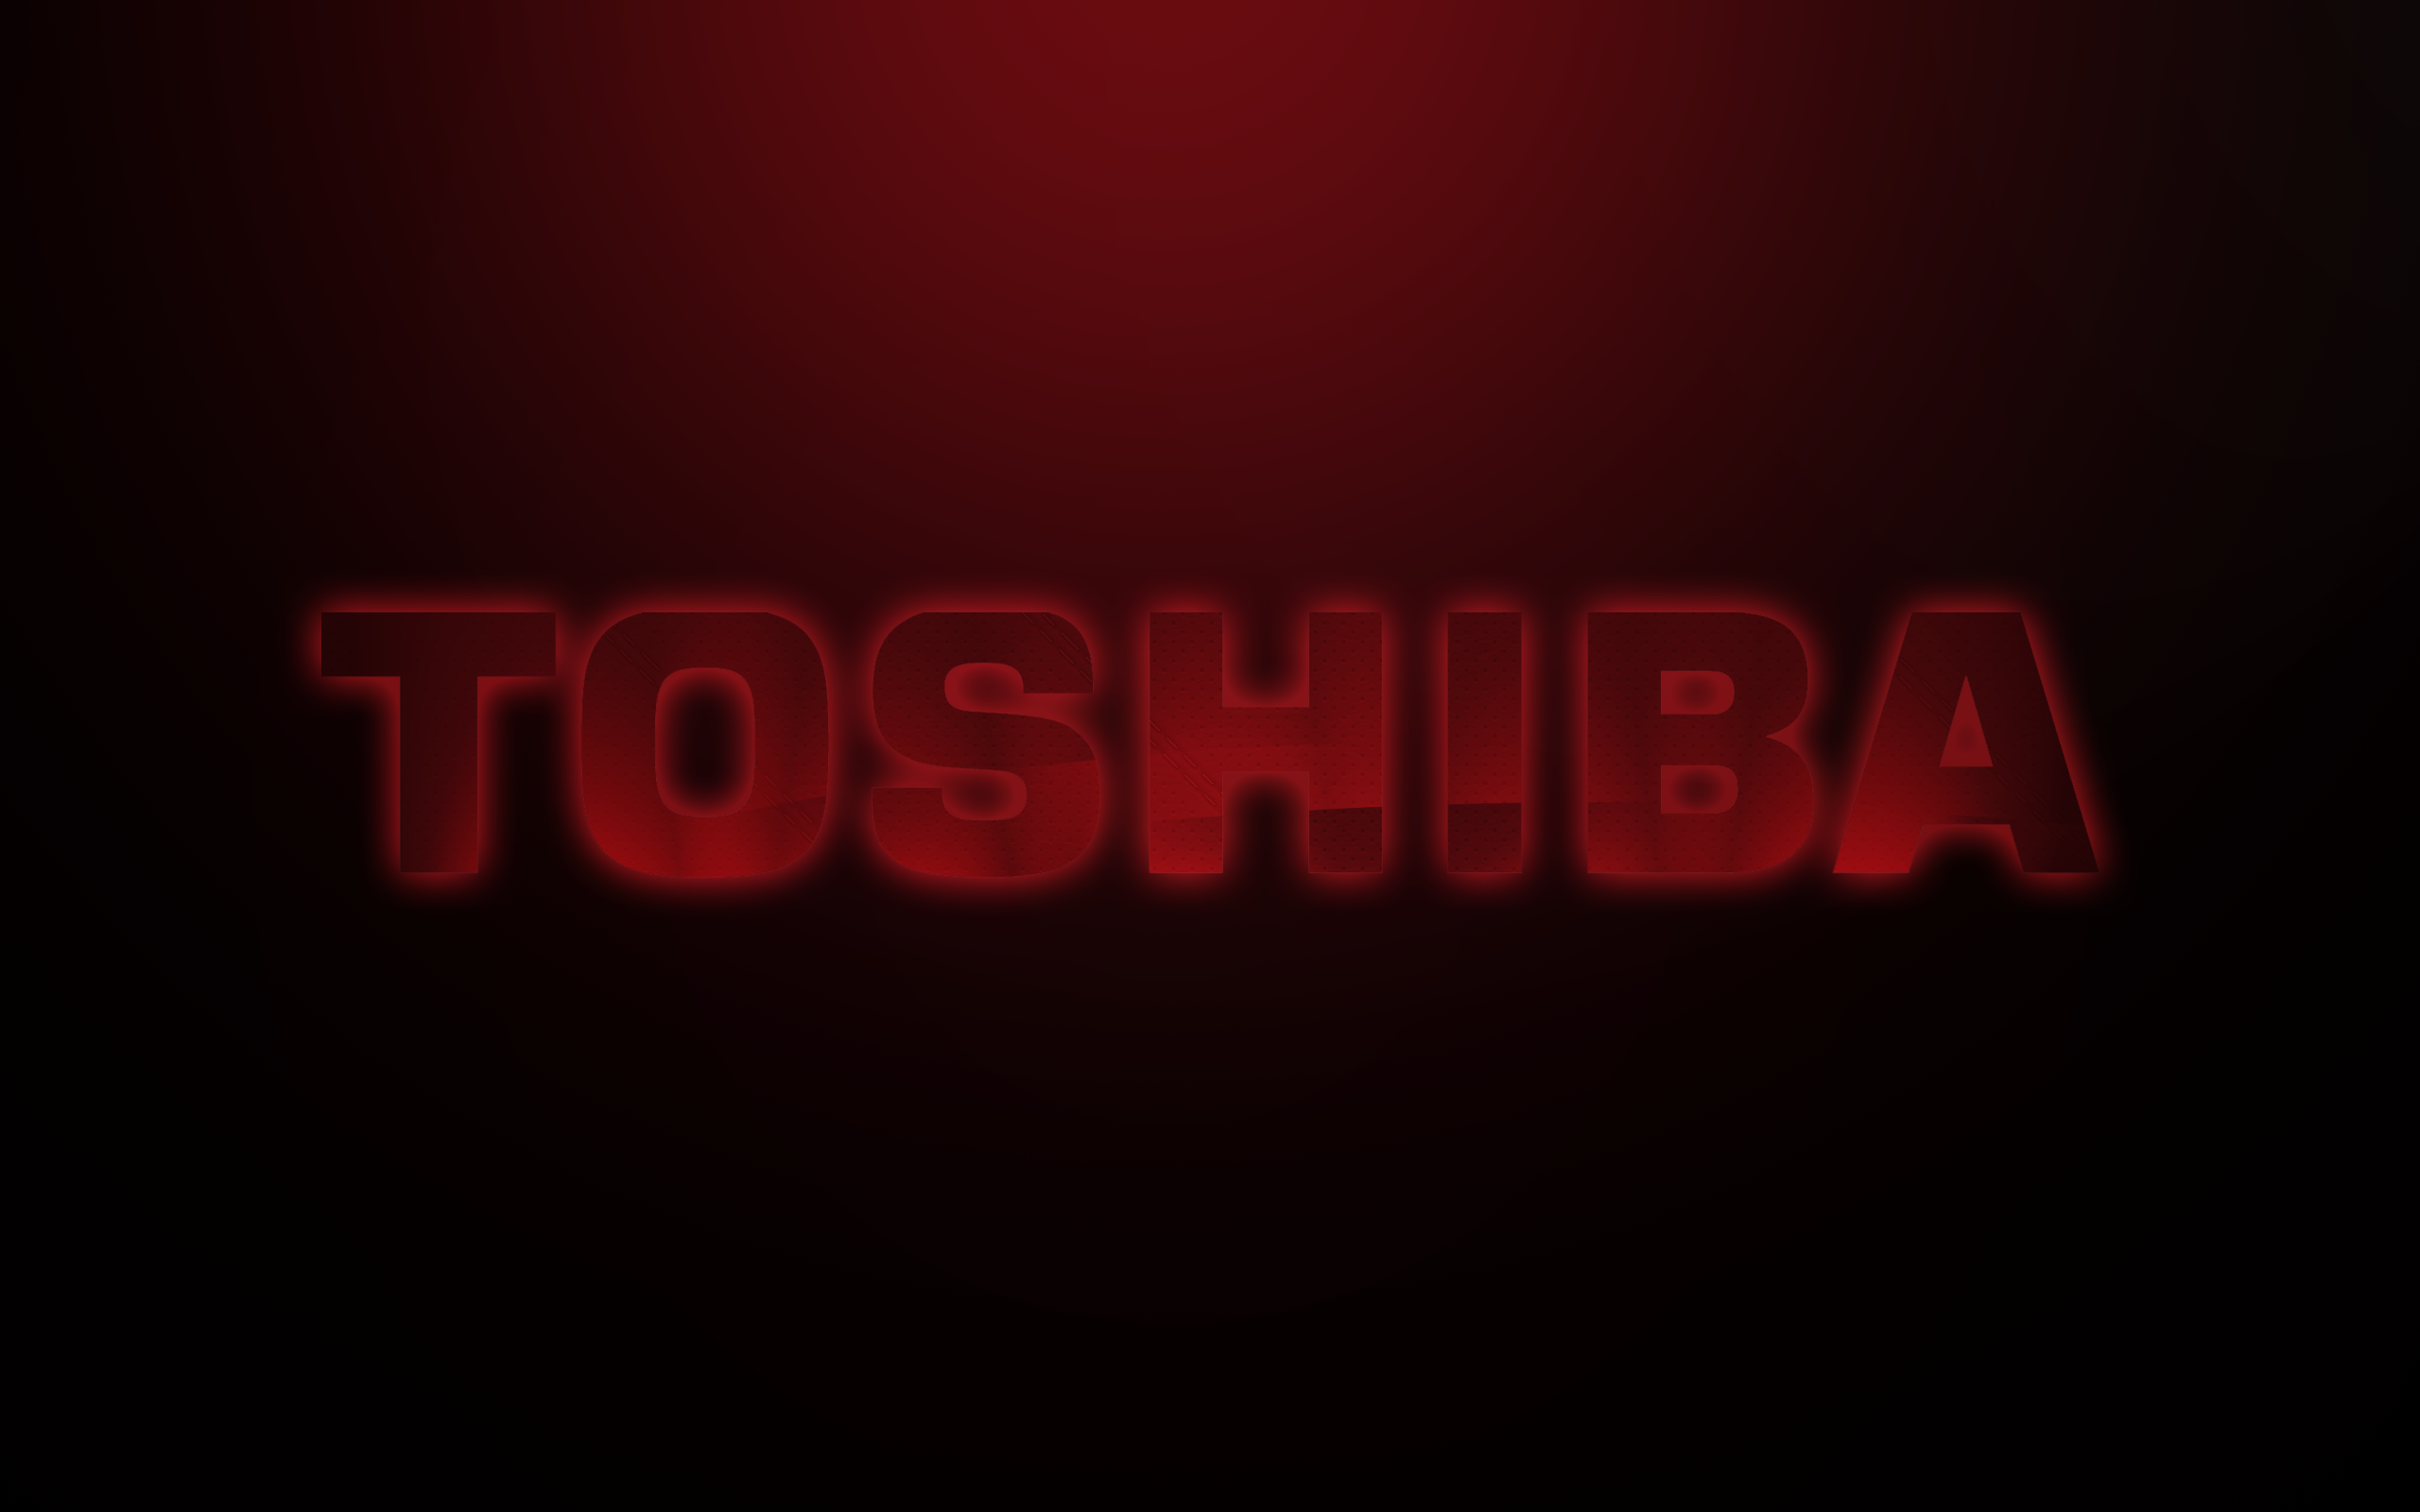 Toshiba Wallpaper by OwlServicespng 17009 2560x1600